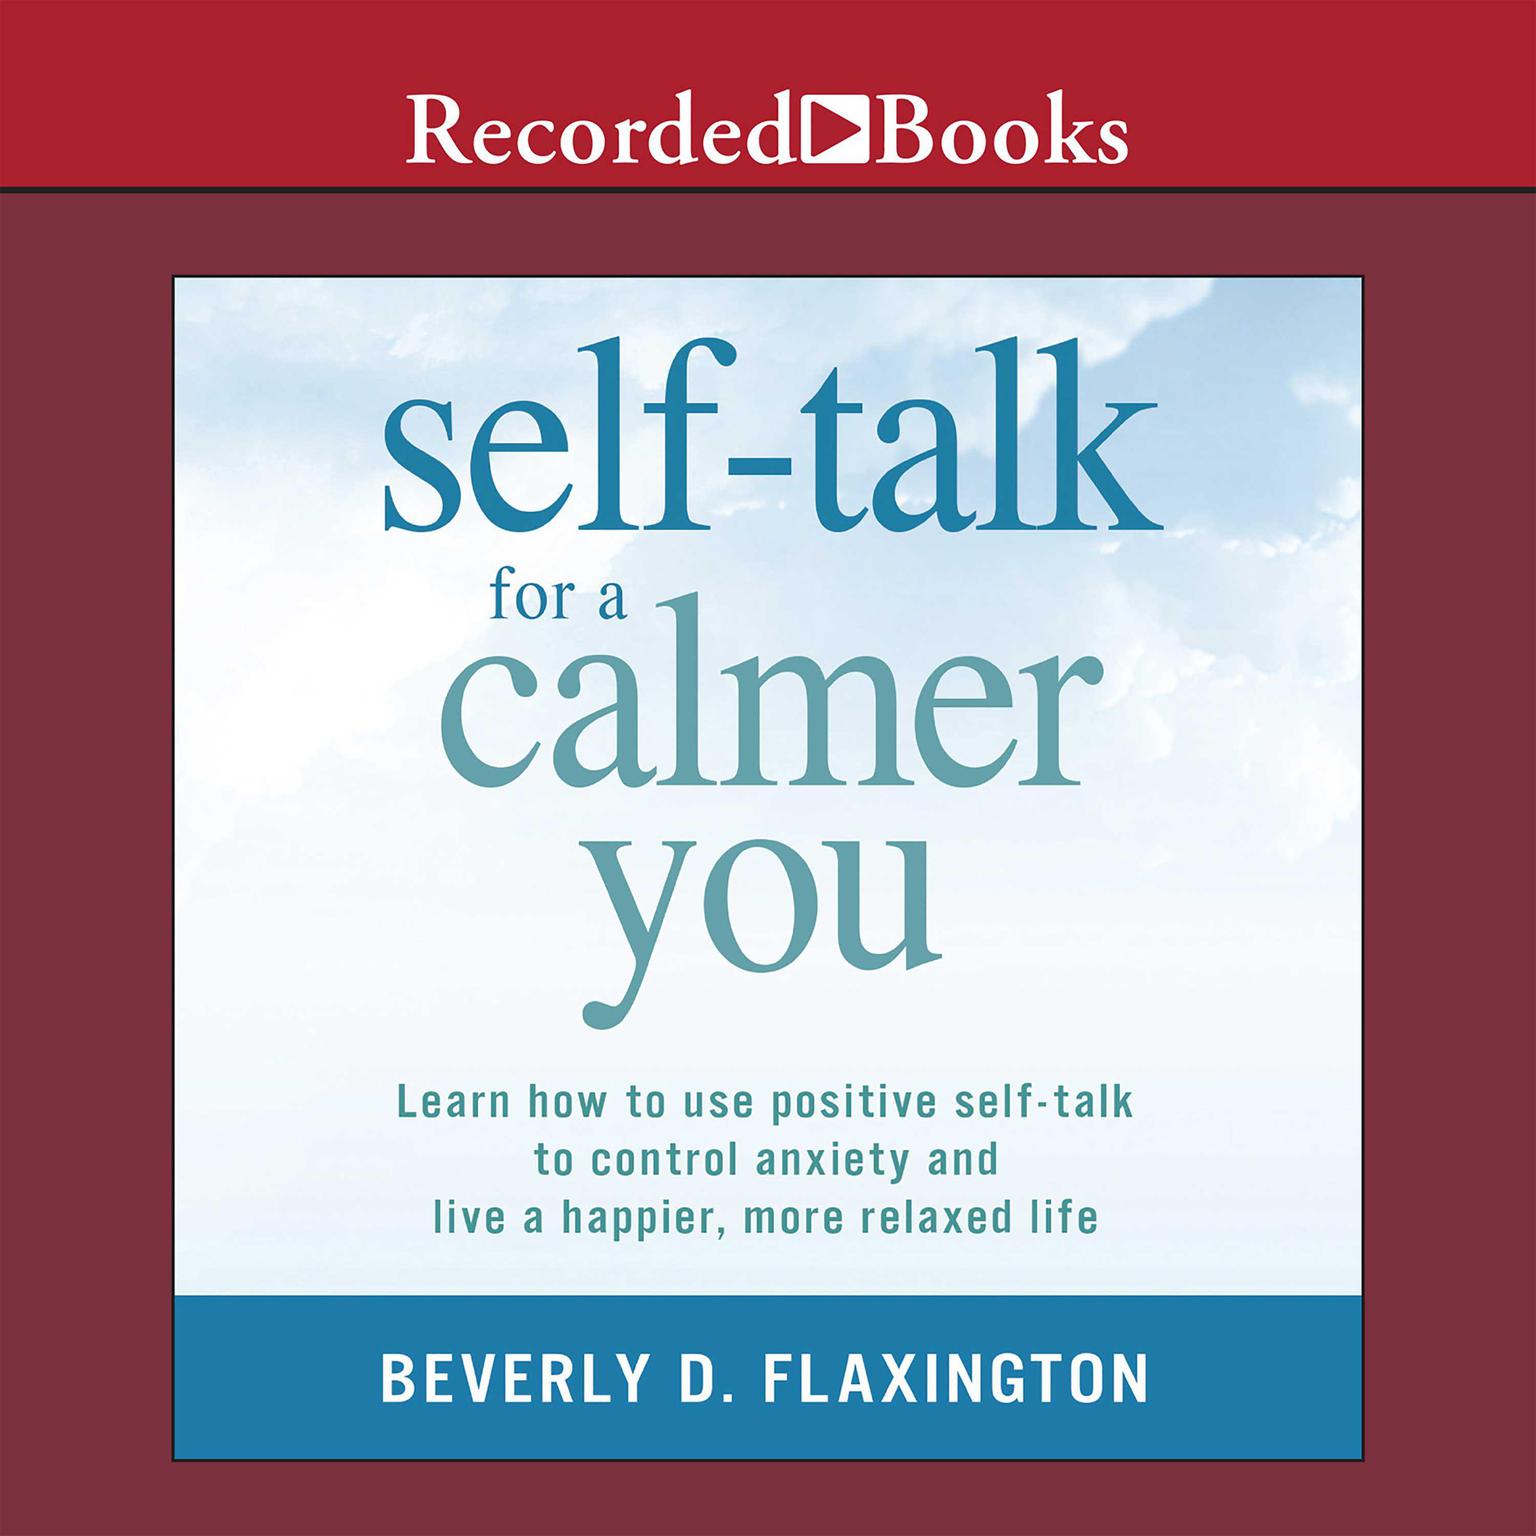 Self-Talk for a Calmer You: Learn how to use positive self-talk to control anxiety and live a happier, more relaxed life Audiobook, by Beverly D. Flaxington